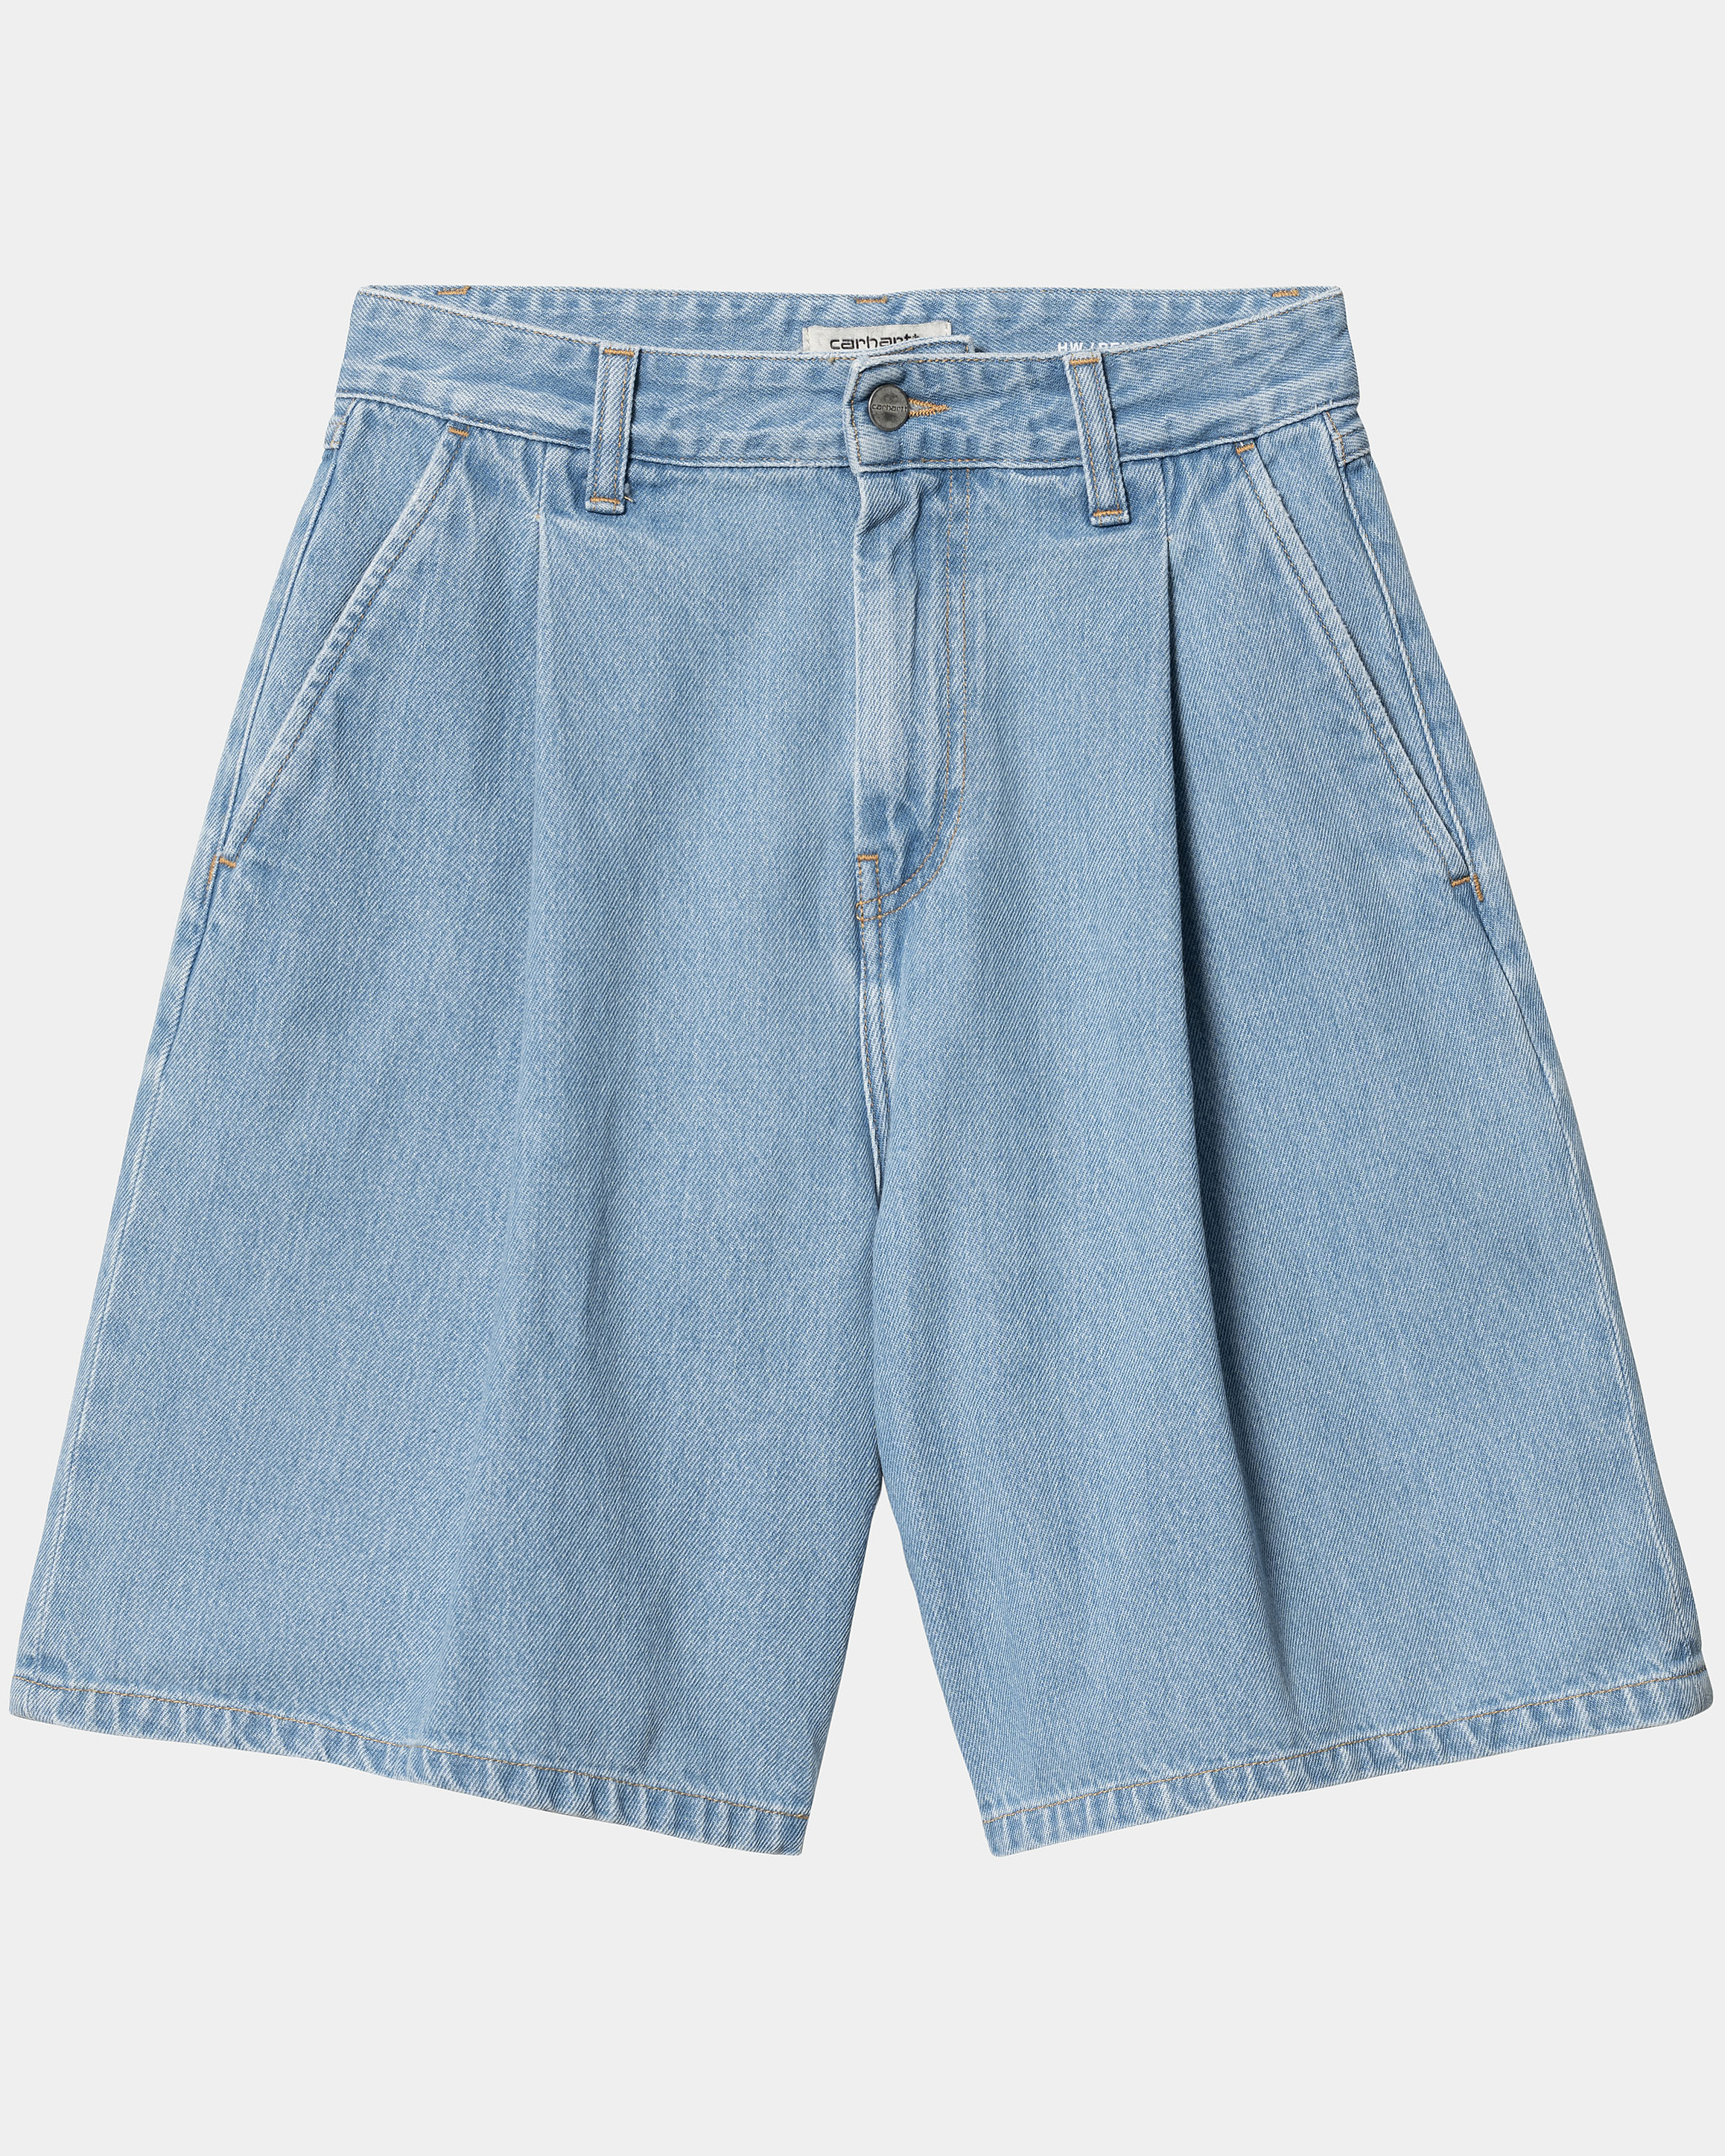 Shorts Alta W´s - Blue Stone Bleached